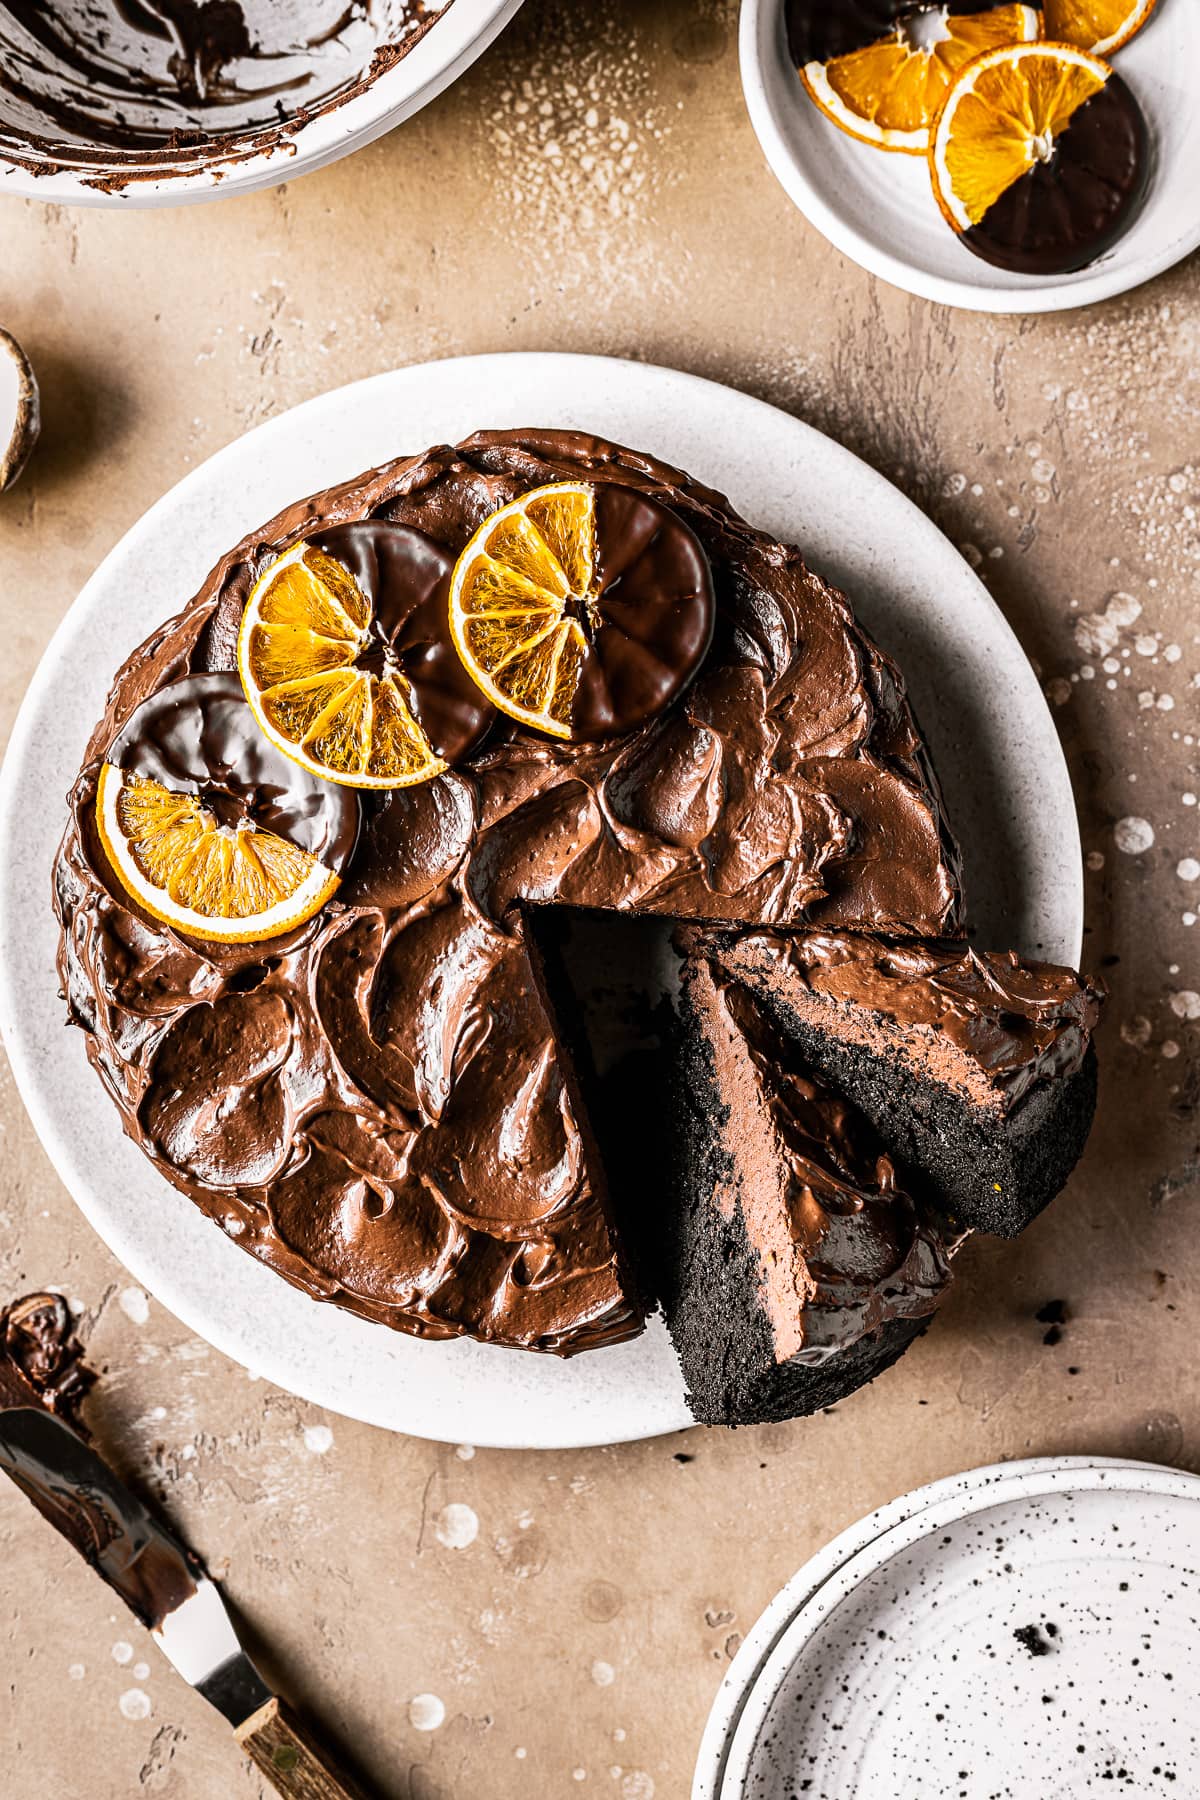 A chocolate cake with two slices cut out and tipped to the side revealing the dark interior and fudgy chocolate frosting. The frosting is decorated with rustic swirls and three dried oranges dipped in chocolate. The cake is on a tan plate on a warm brown stone background.